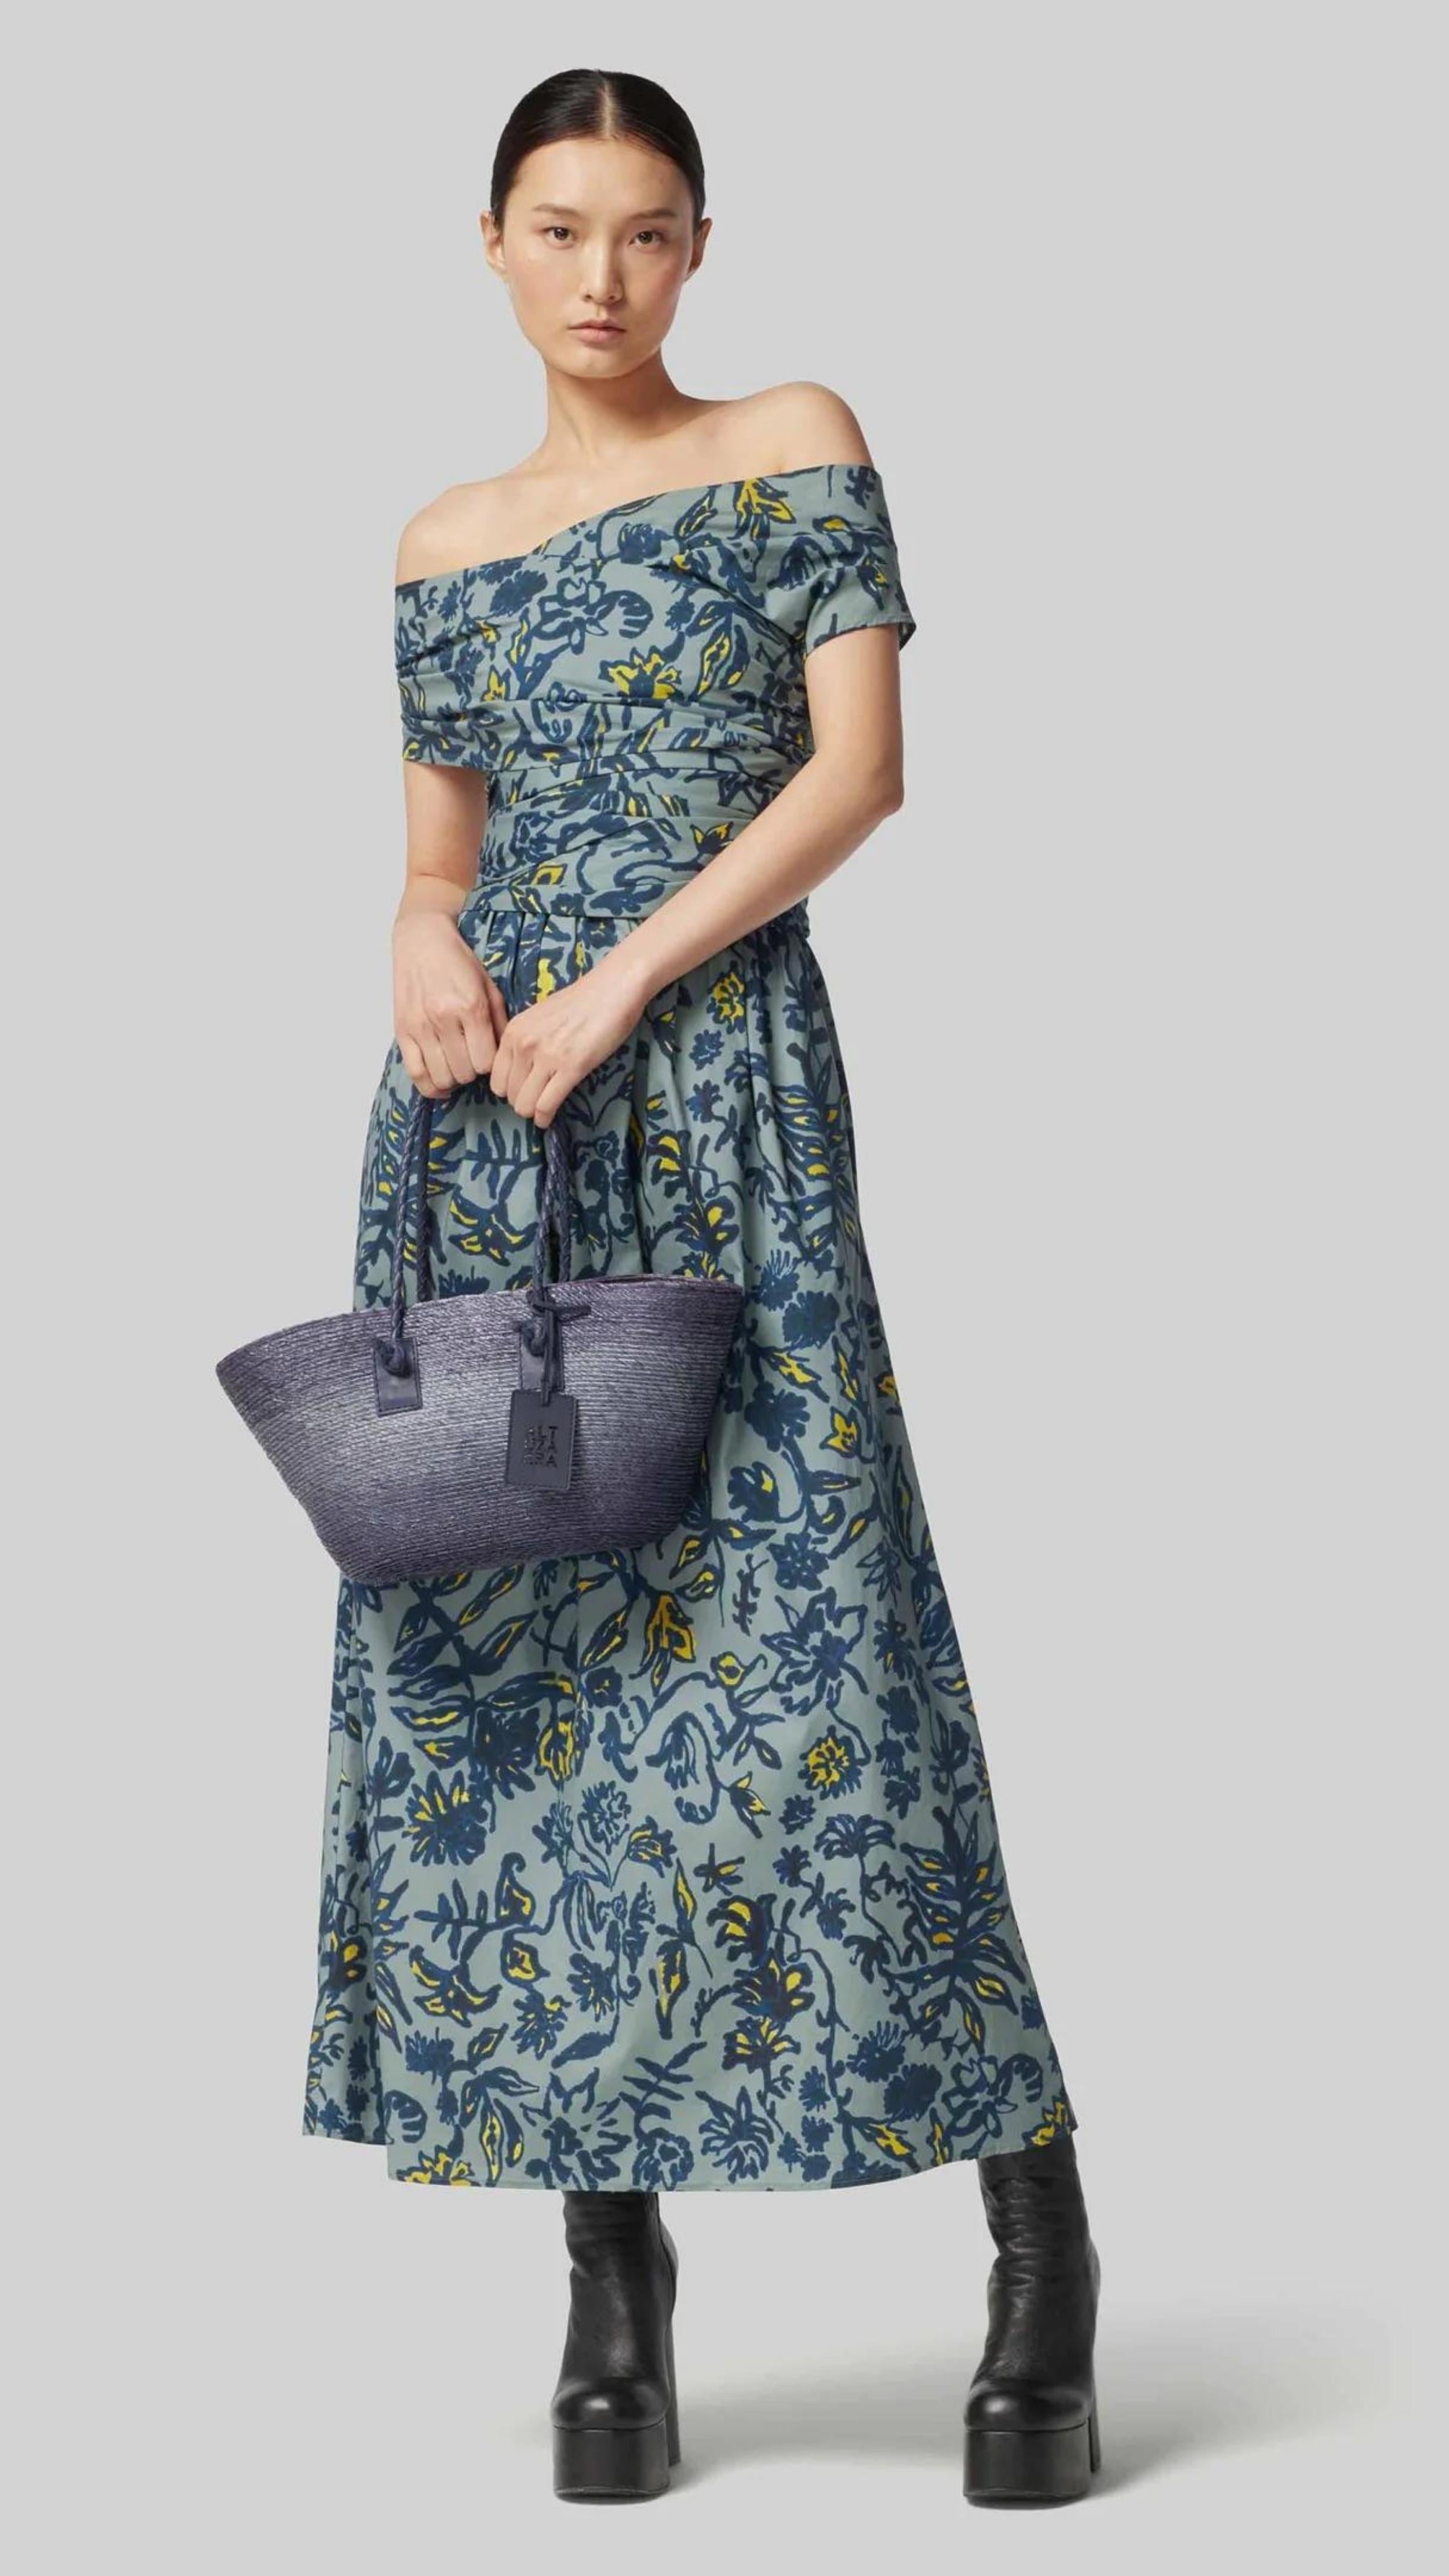 Altuzarra Corfu Dress in Stormcloud Shibori Flower. Relaxed off the shoulder cotton dress in beautiful grey blue, dark blue and yellow floral pattern. Wrap around style top with wrap around belt flows into the straight midi length skirt. Shown on model facing front. Available at experience 27 in madrid spain.